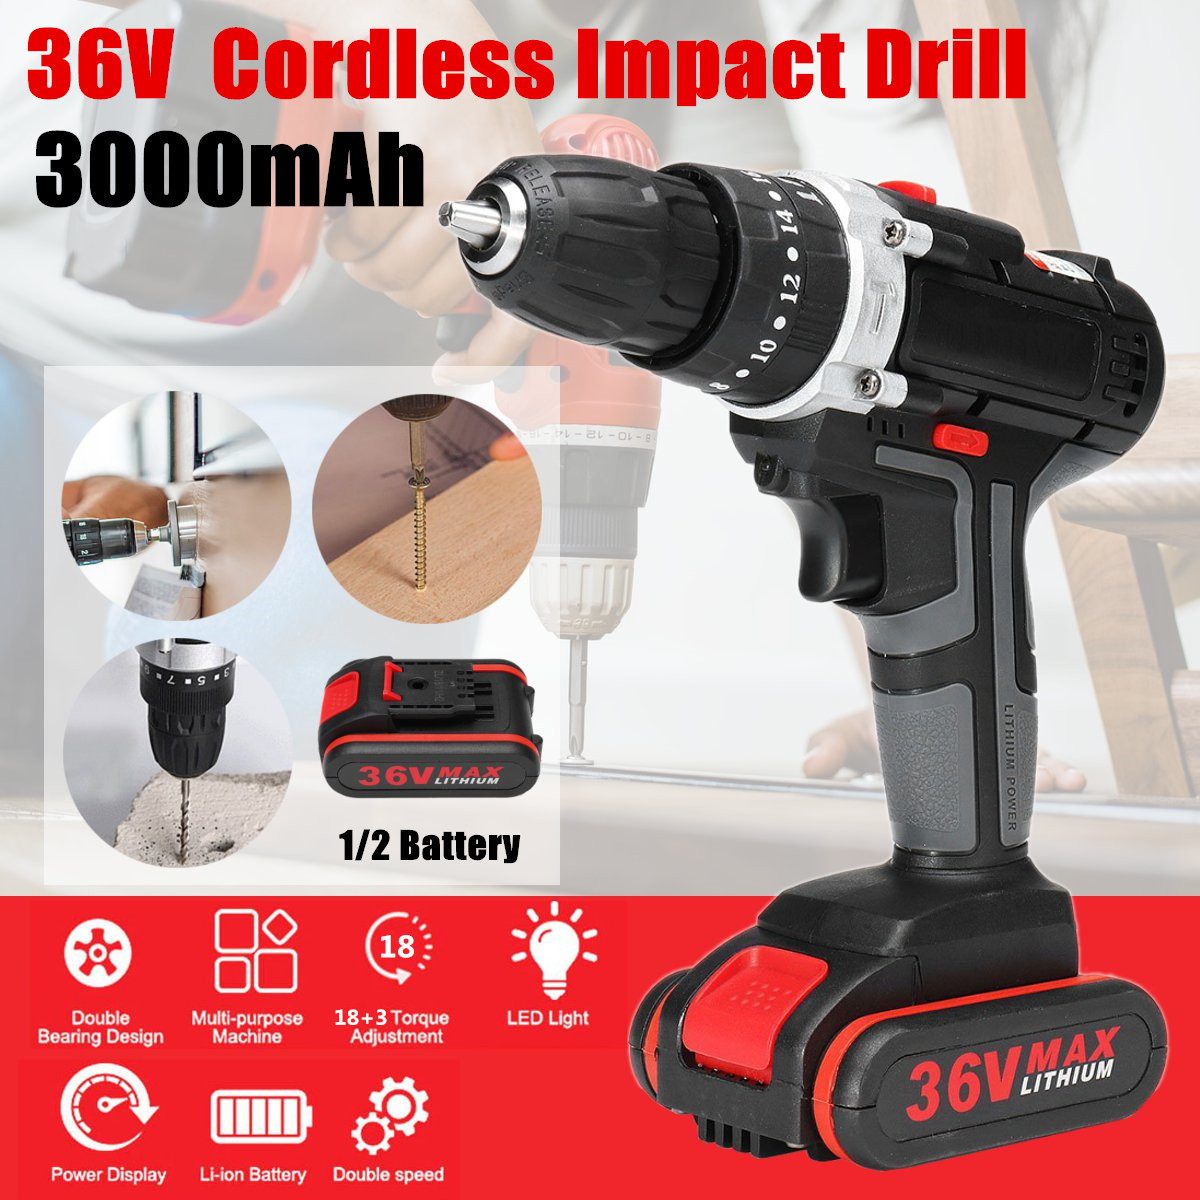 36V-Cordless-Lithium-Electric-Drill-Impact-Power-Drills-28Nm-3000mAh-183-Torque-Stage-Drill-Tools-1404353-1